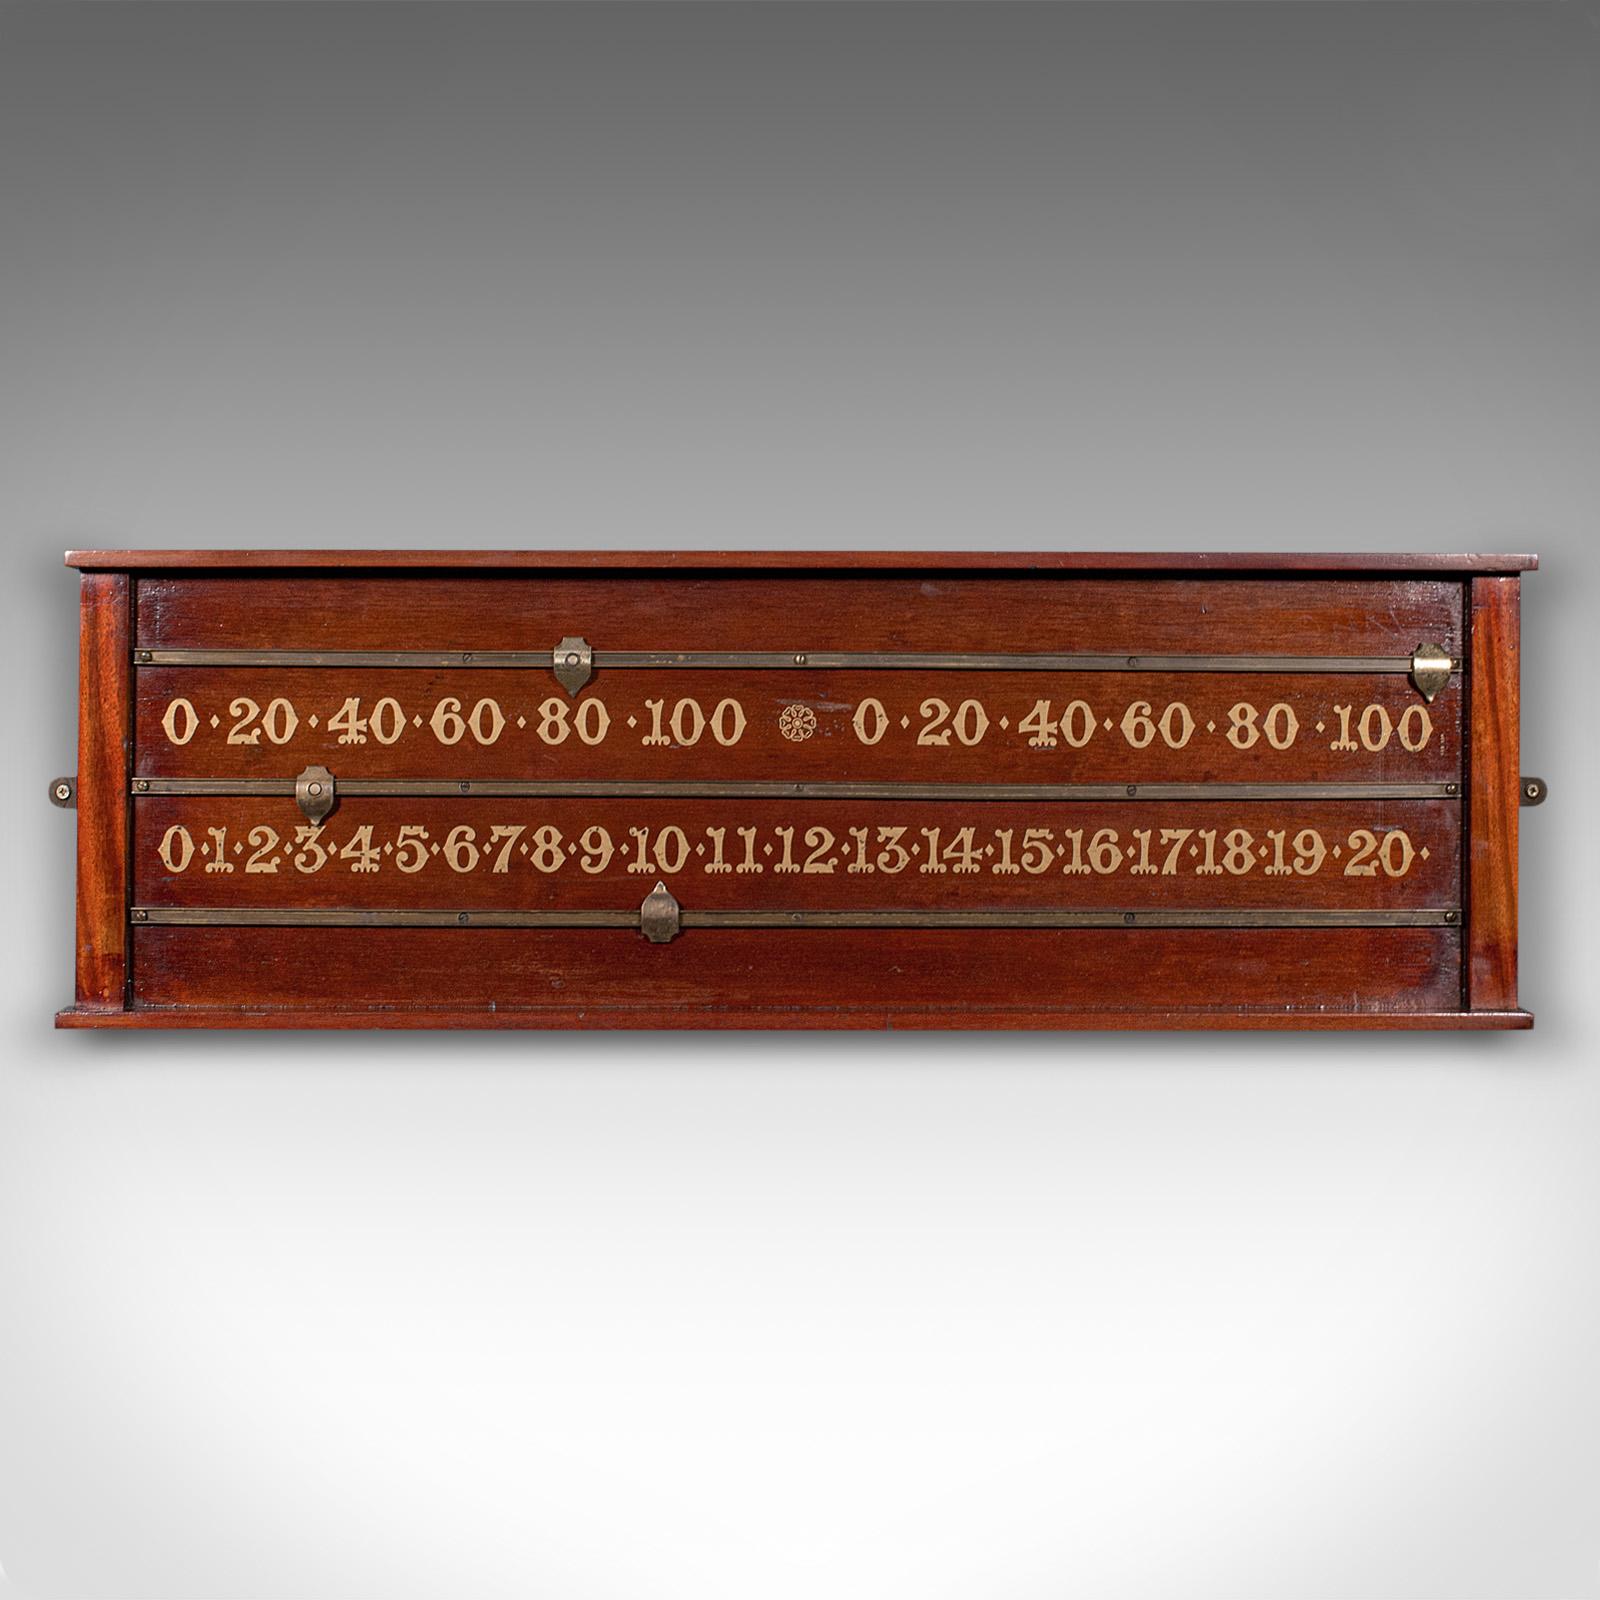 This is an antique billiard scoreboard. An English, mahogany and brass games room score counter, dating to the late Victorian period, circa 1900.

Charming two-player score board, ideal for the games room
Displays a desirable aged patina